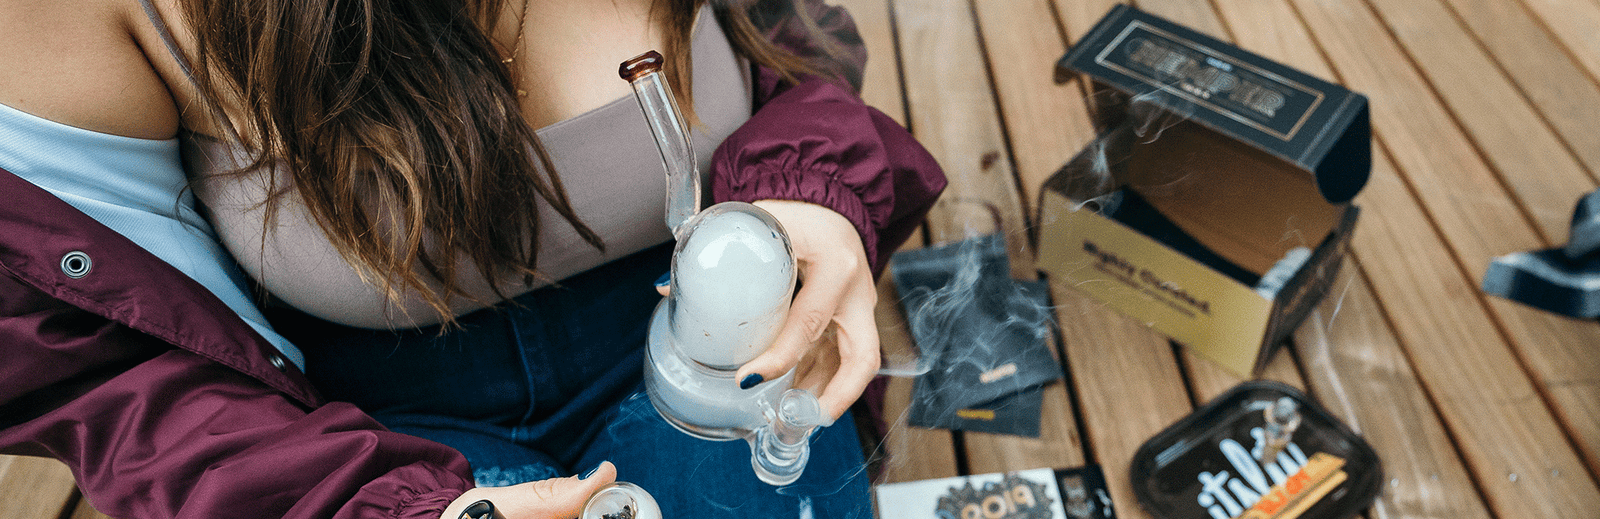 Can Smoking from a Bong Be Healthier - Read More - HEMPER